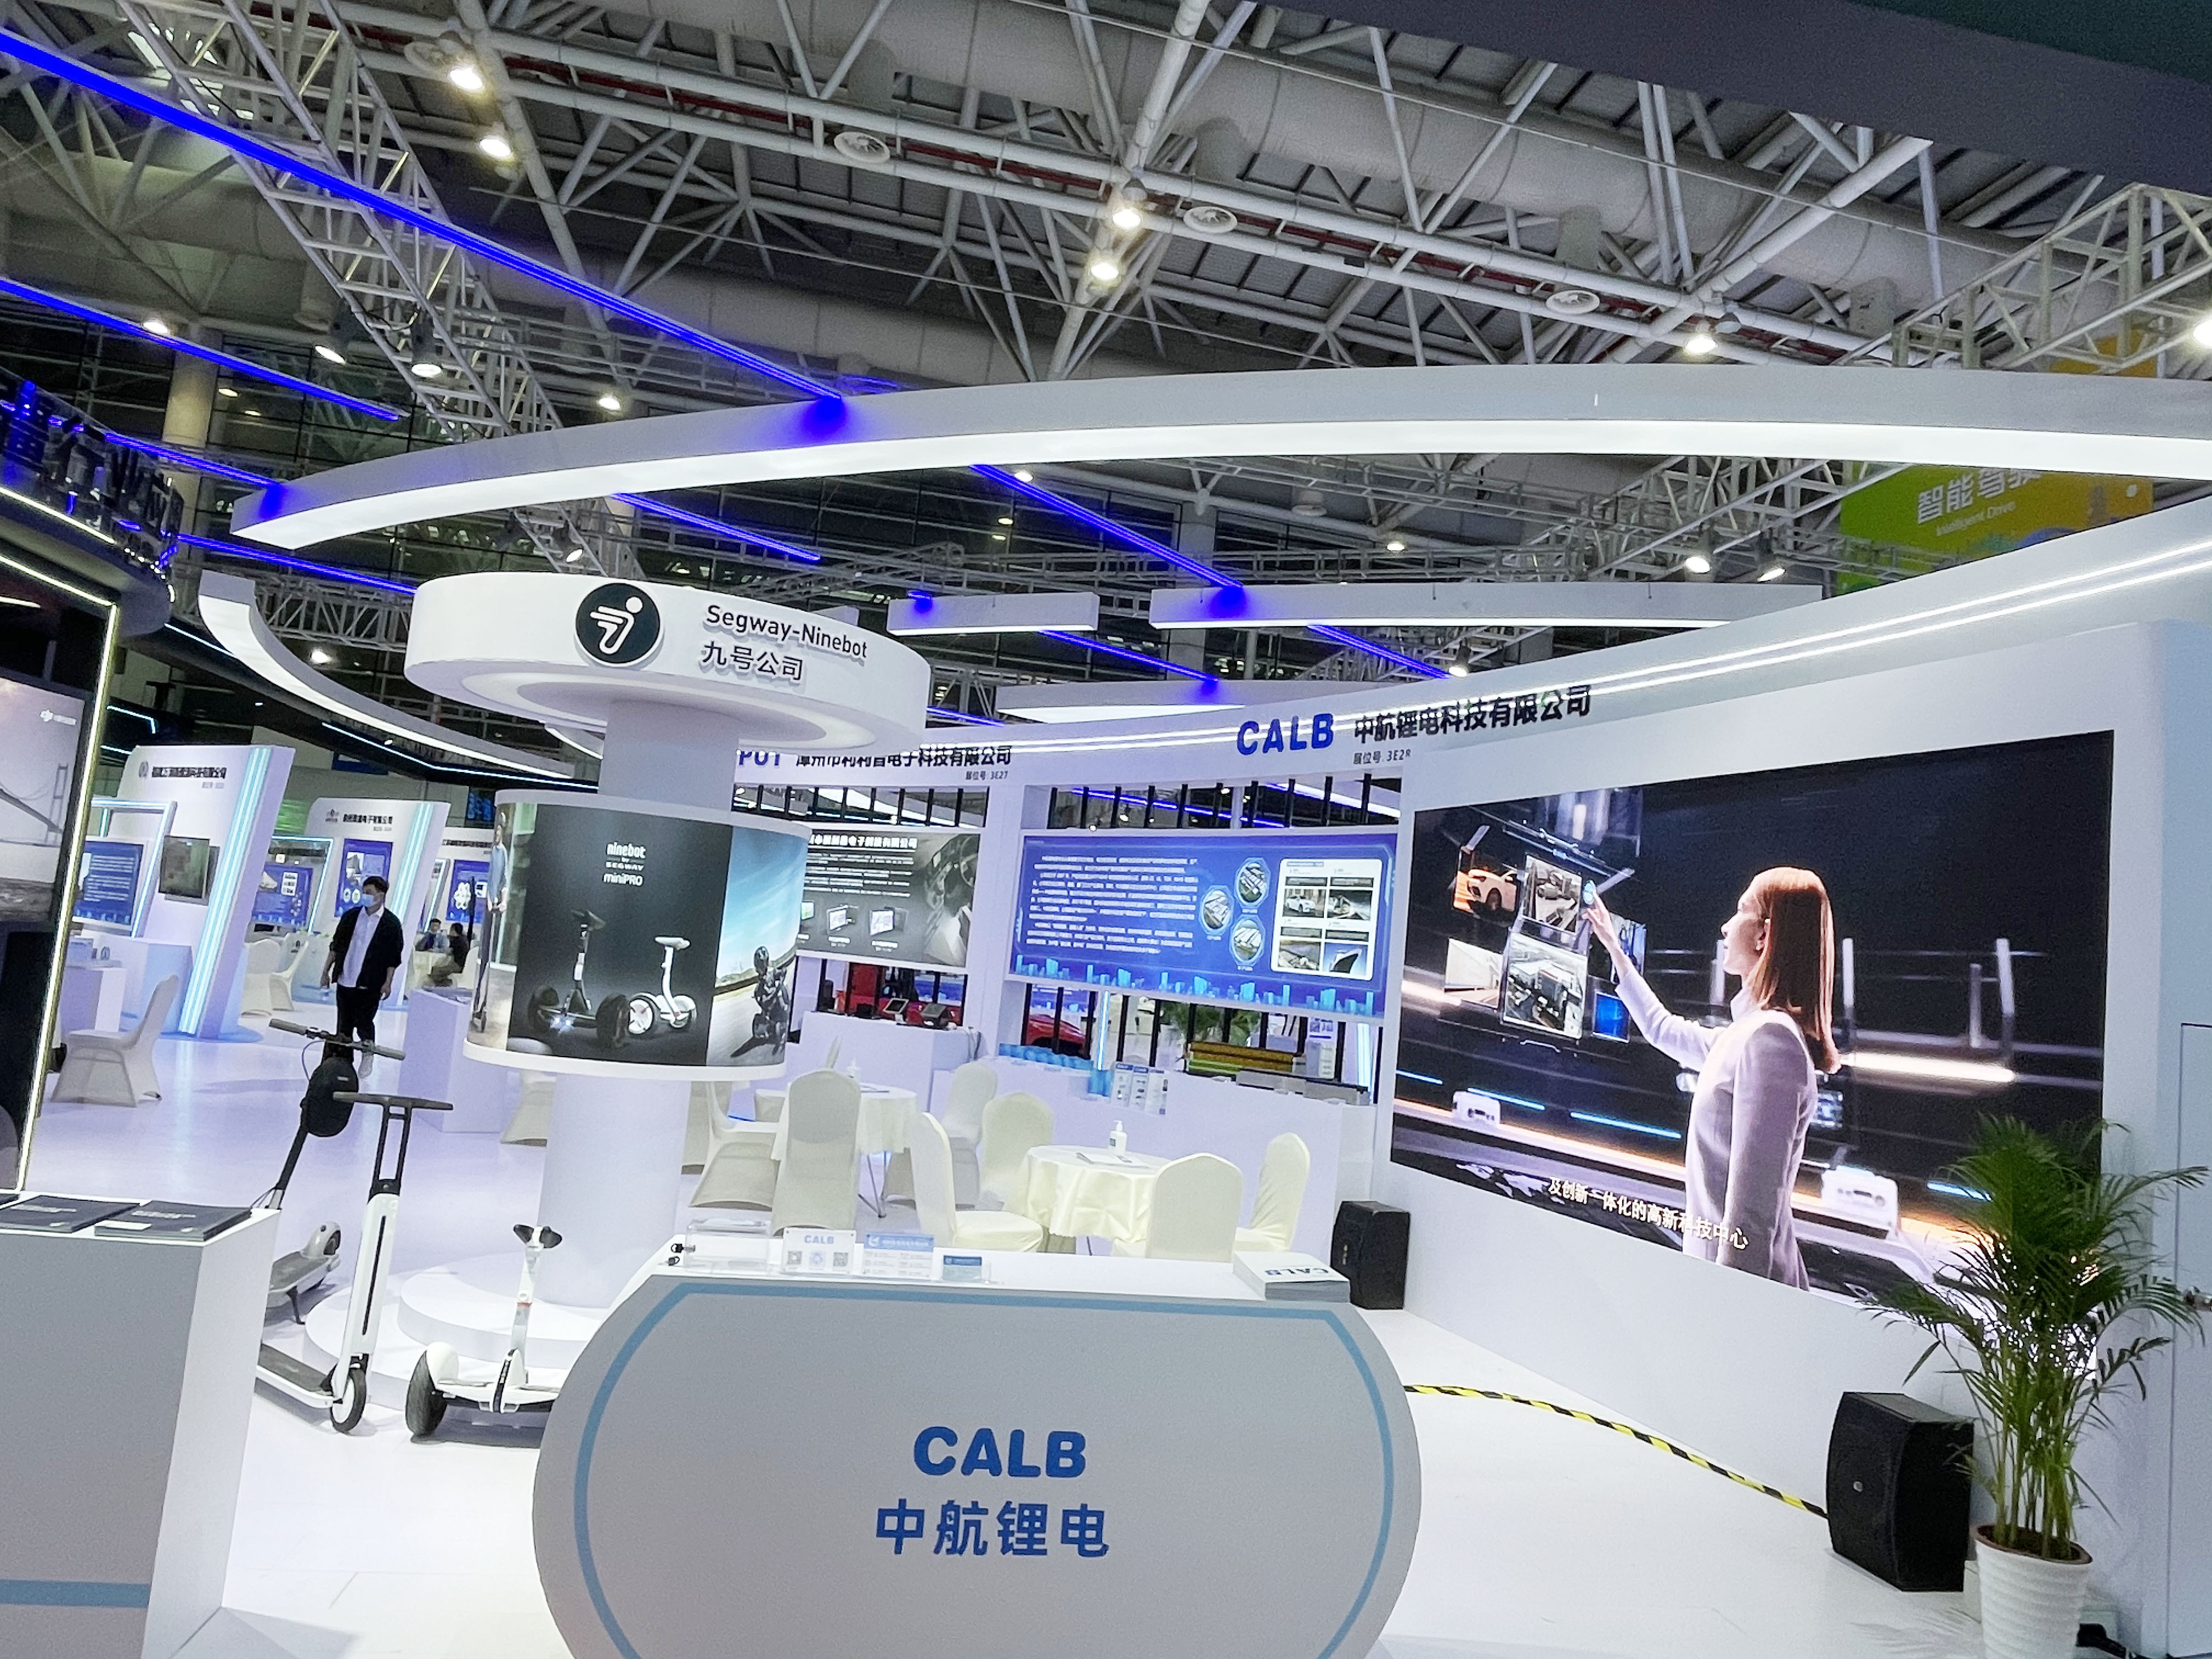 CALB Made its Appearance in the China (Fuzhou) International Digital Products Expo